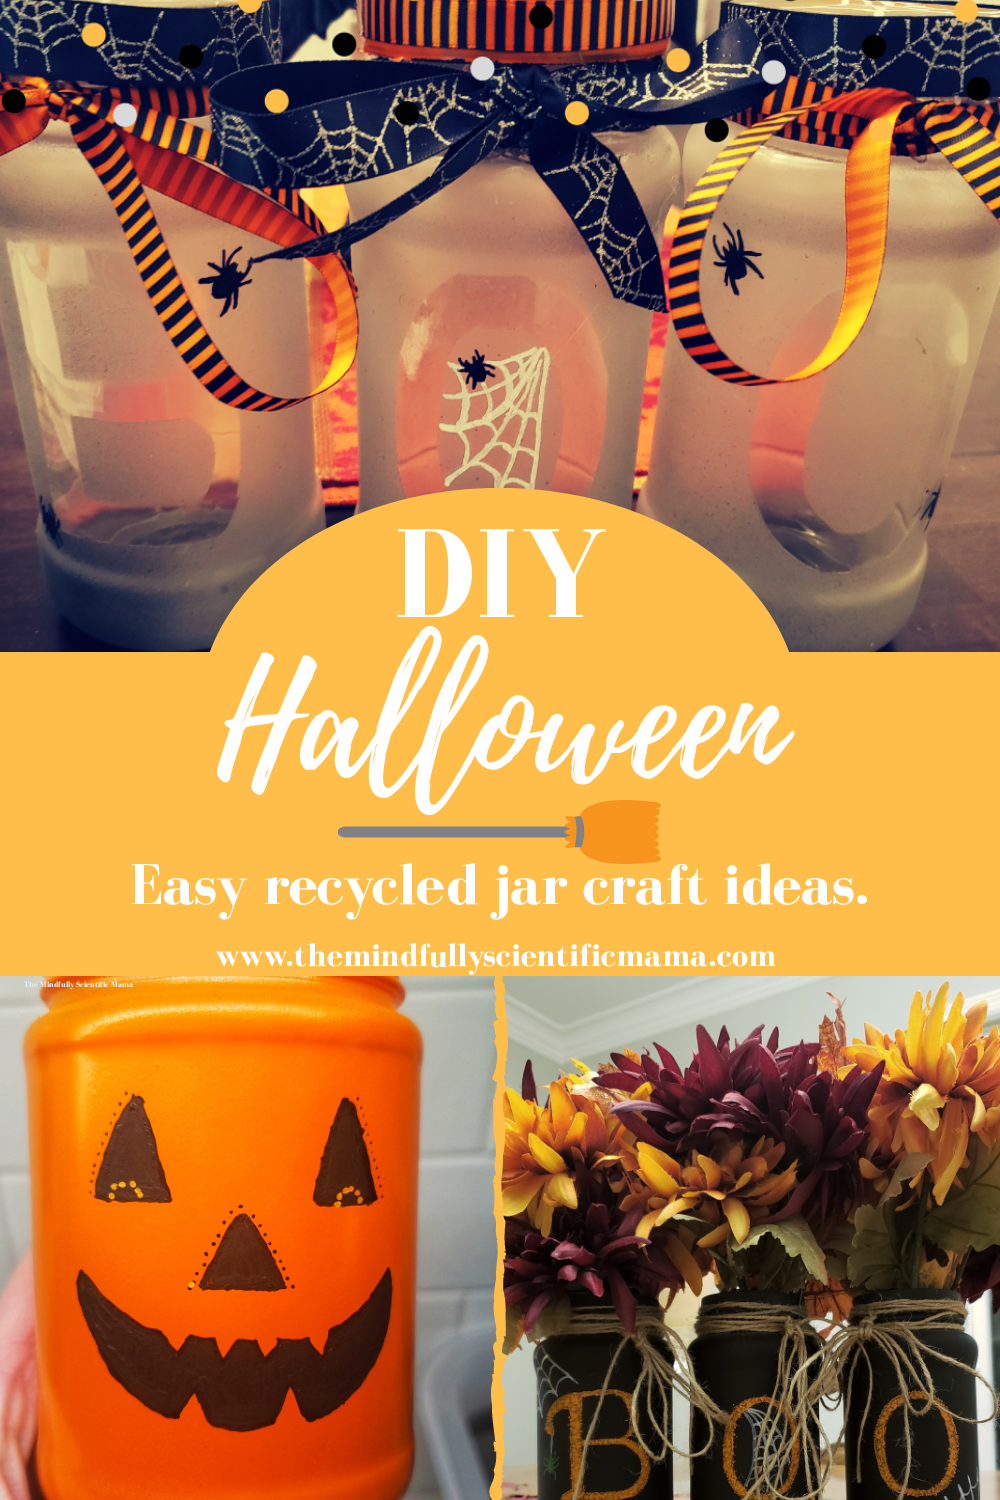 Fall Craft Using Recycled Jars - THE MINDFULLY SCIENTIFIC MAMA